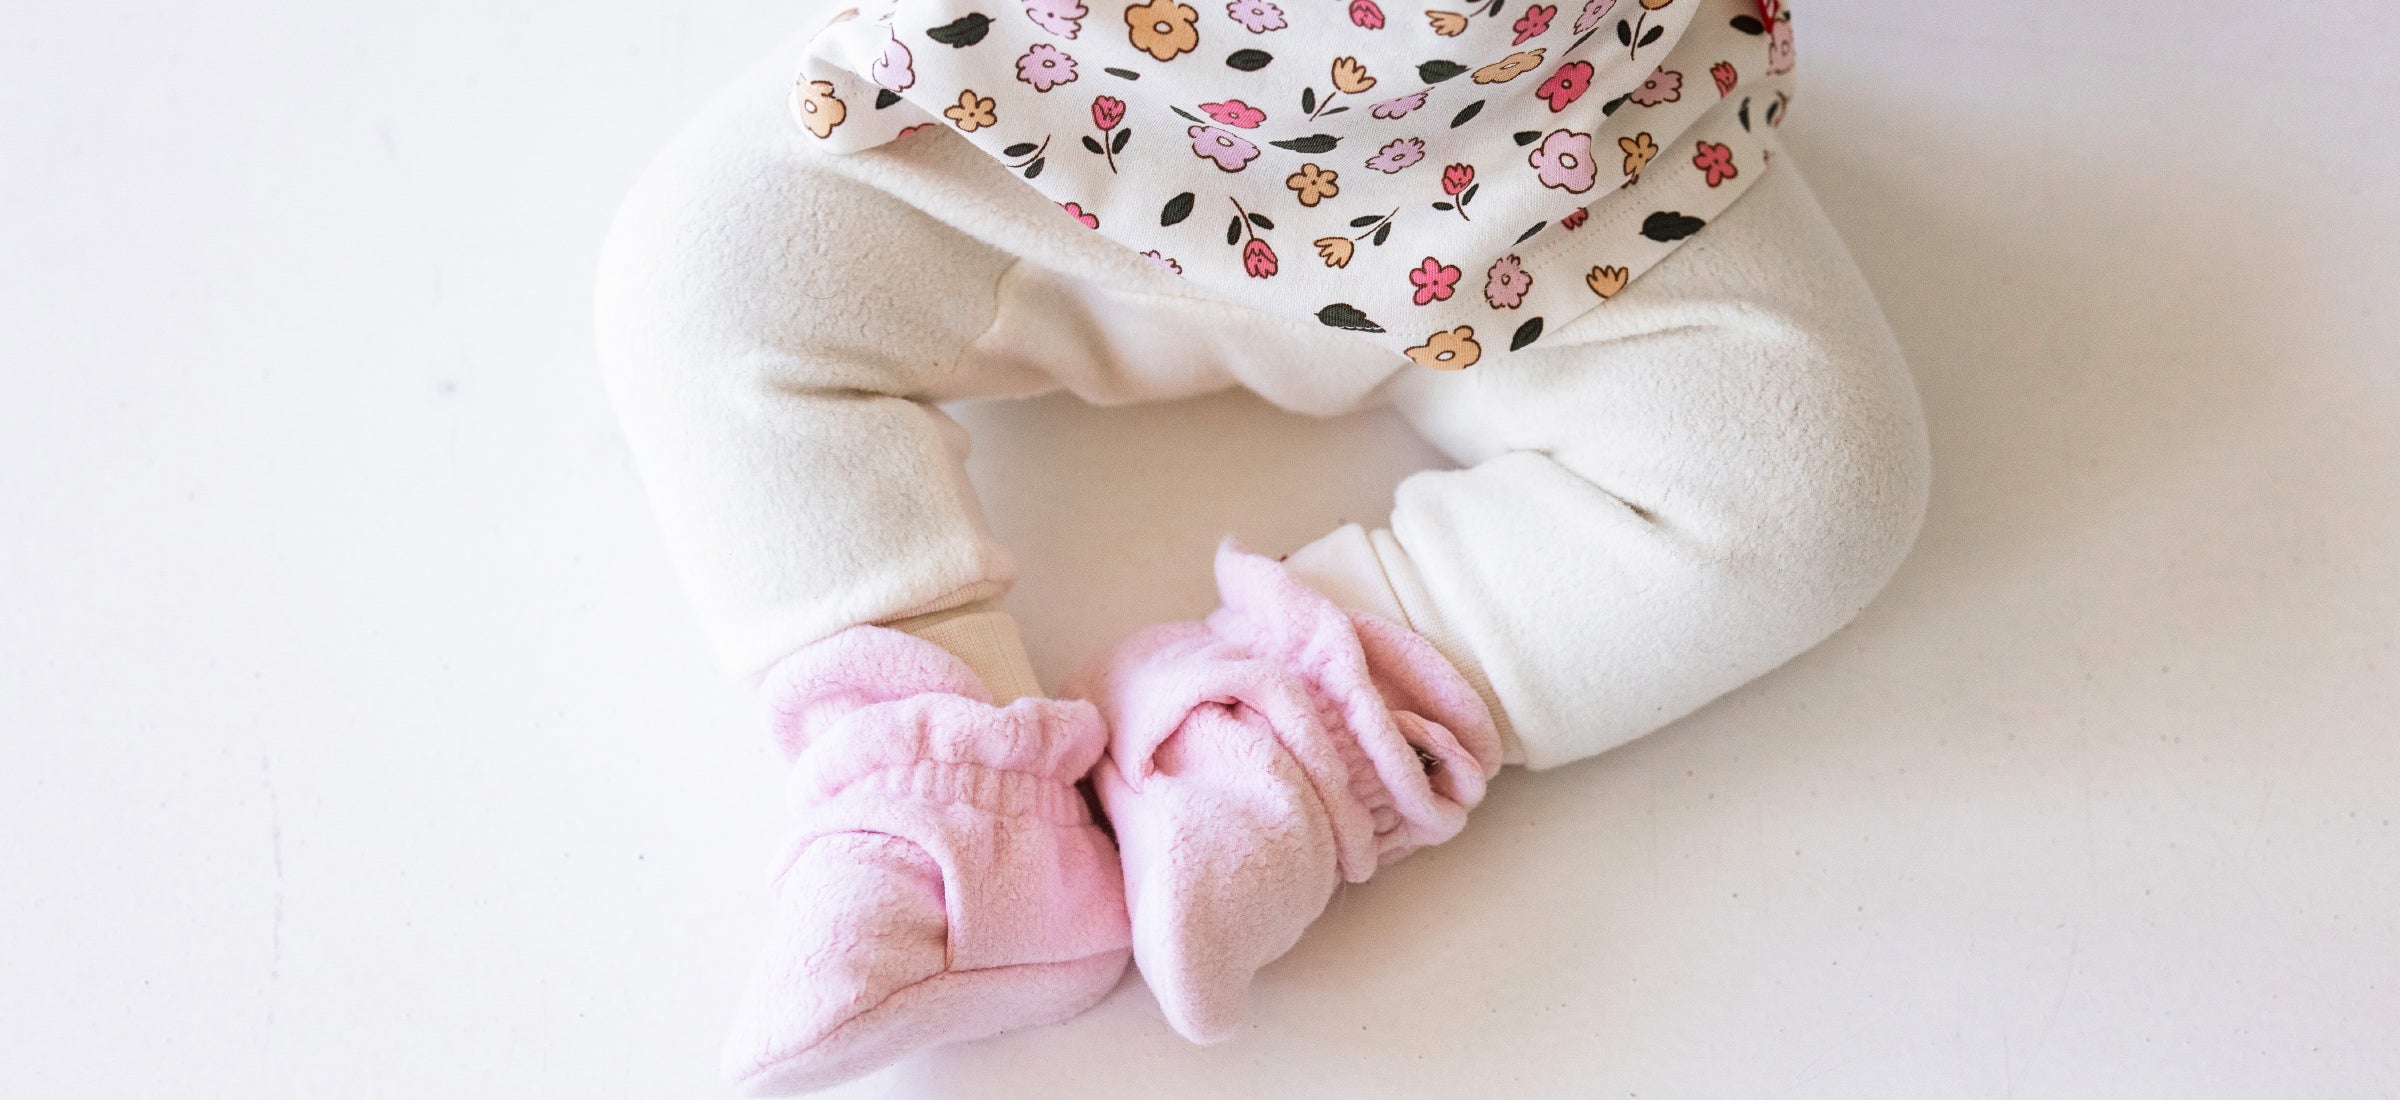 Baby Designer Clothes, Shoes & Outfits